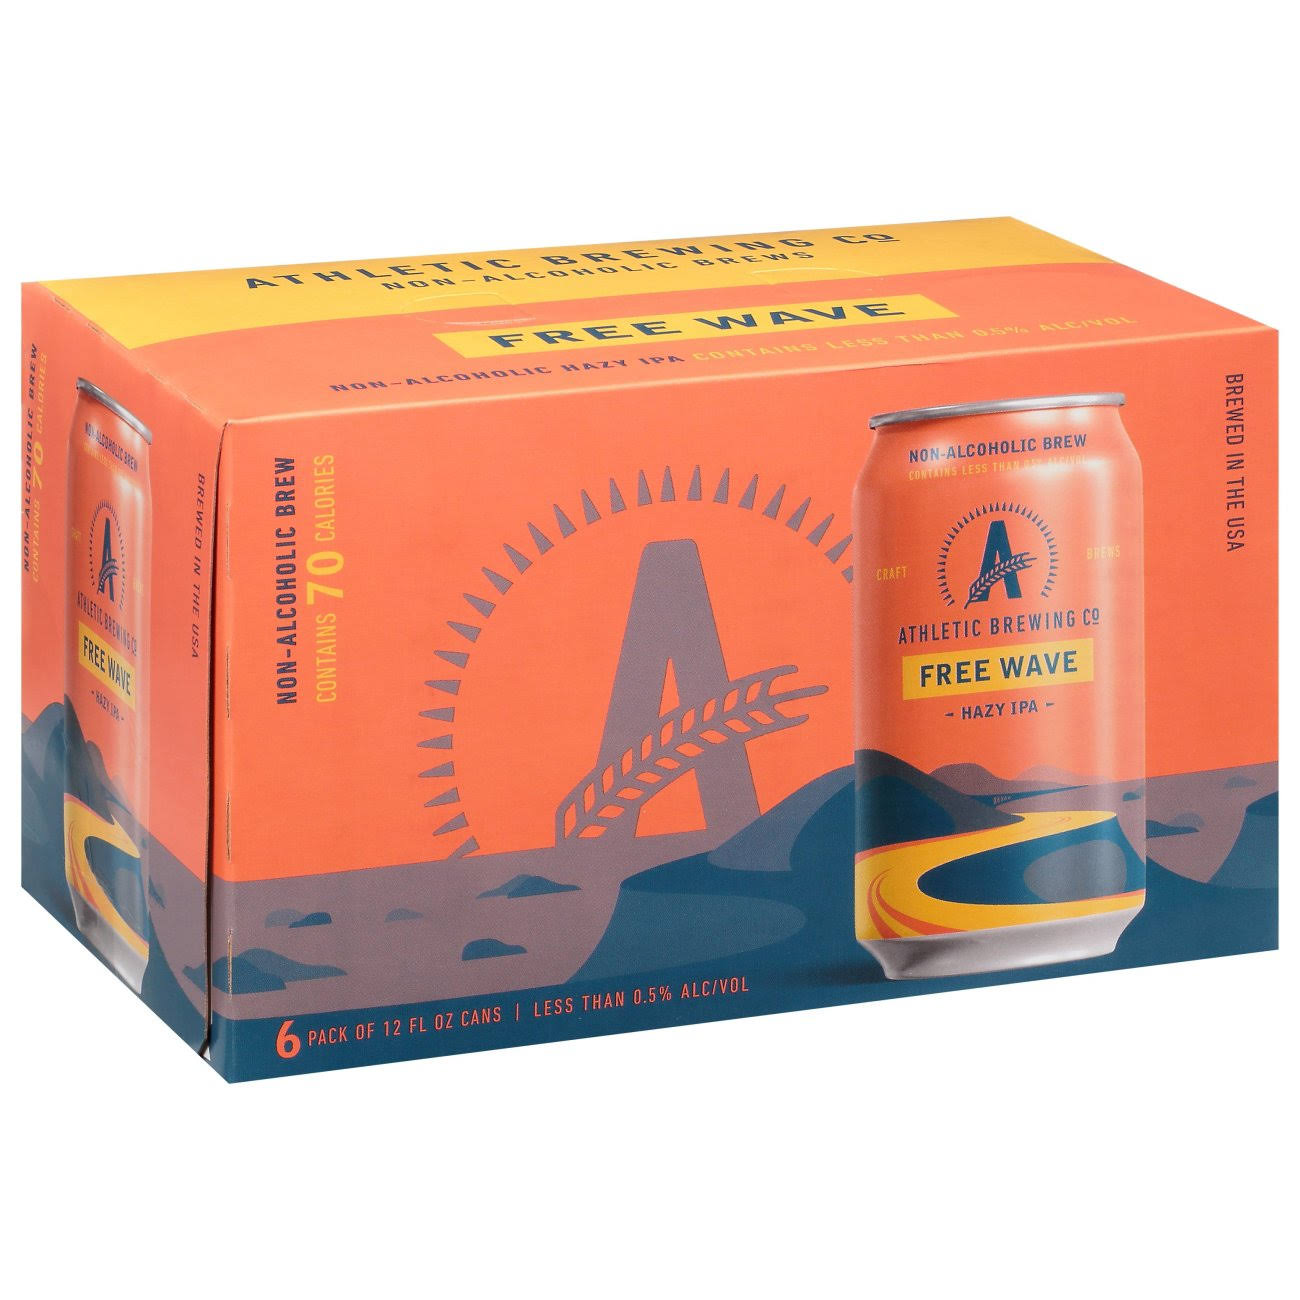 Athletic Brewing Company Free Wave Hazy IPA (Non-Alcoholic) 6-Pack